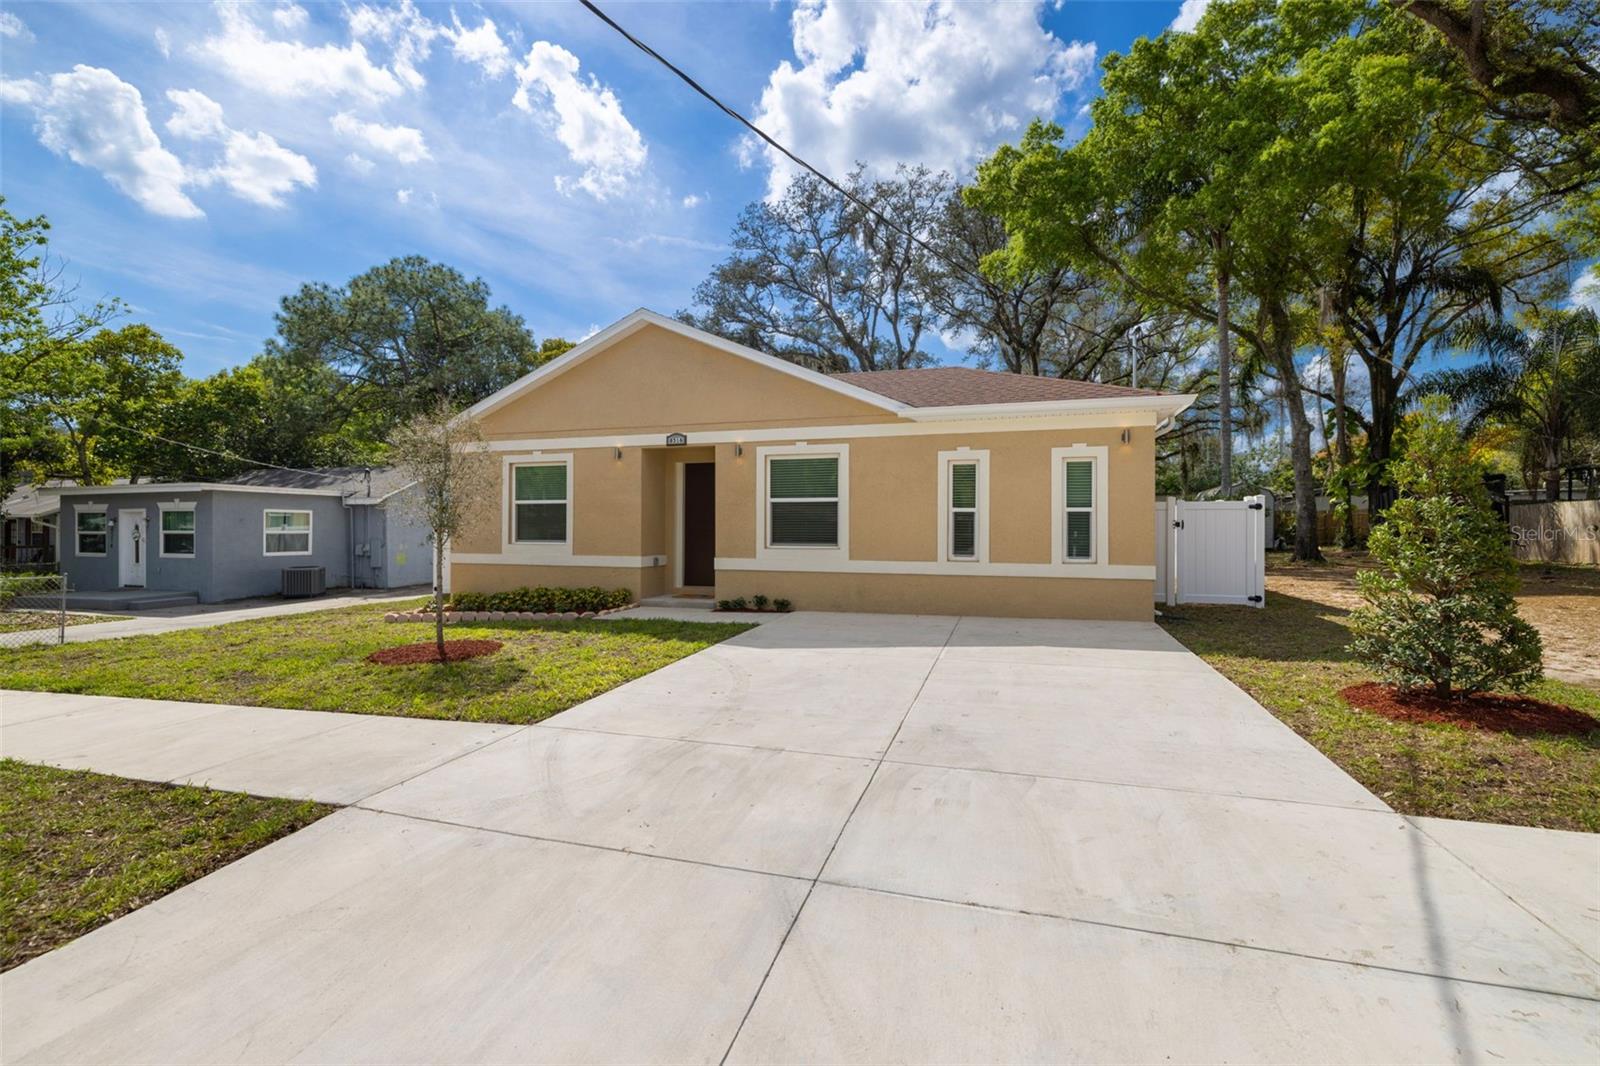 Details for 8516 48th Street, TAMPA, FL 33617